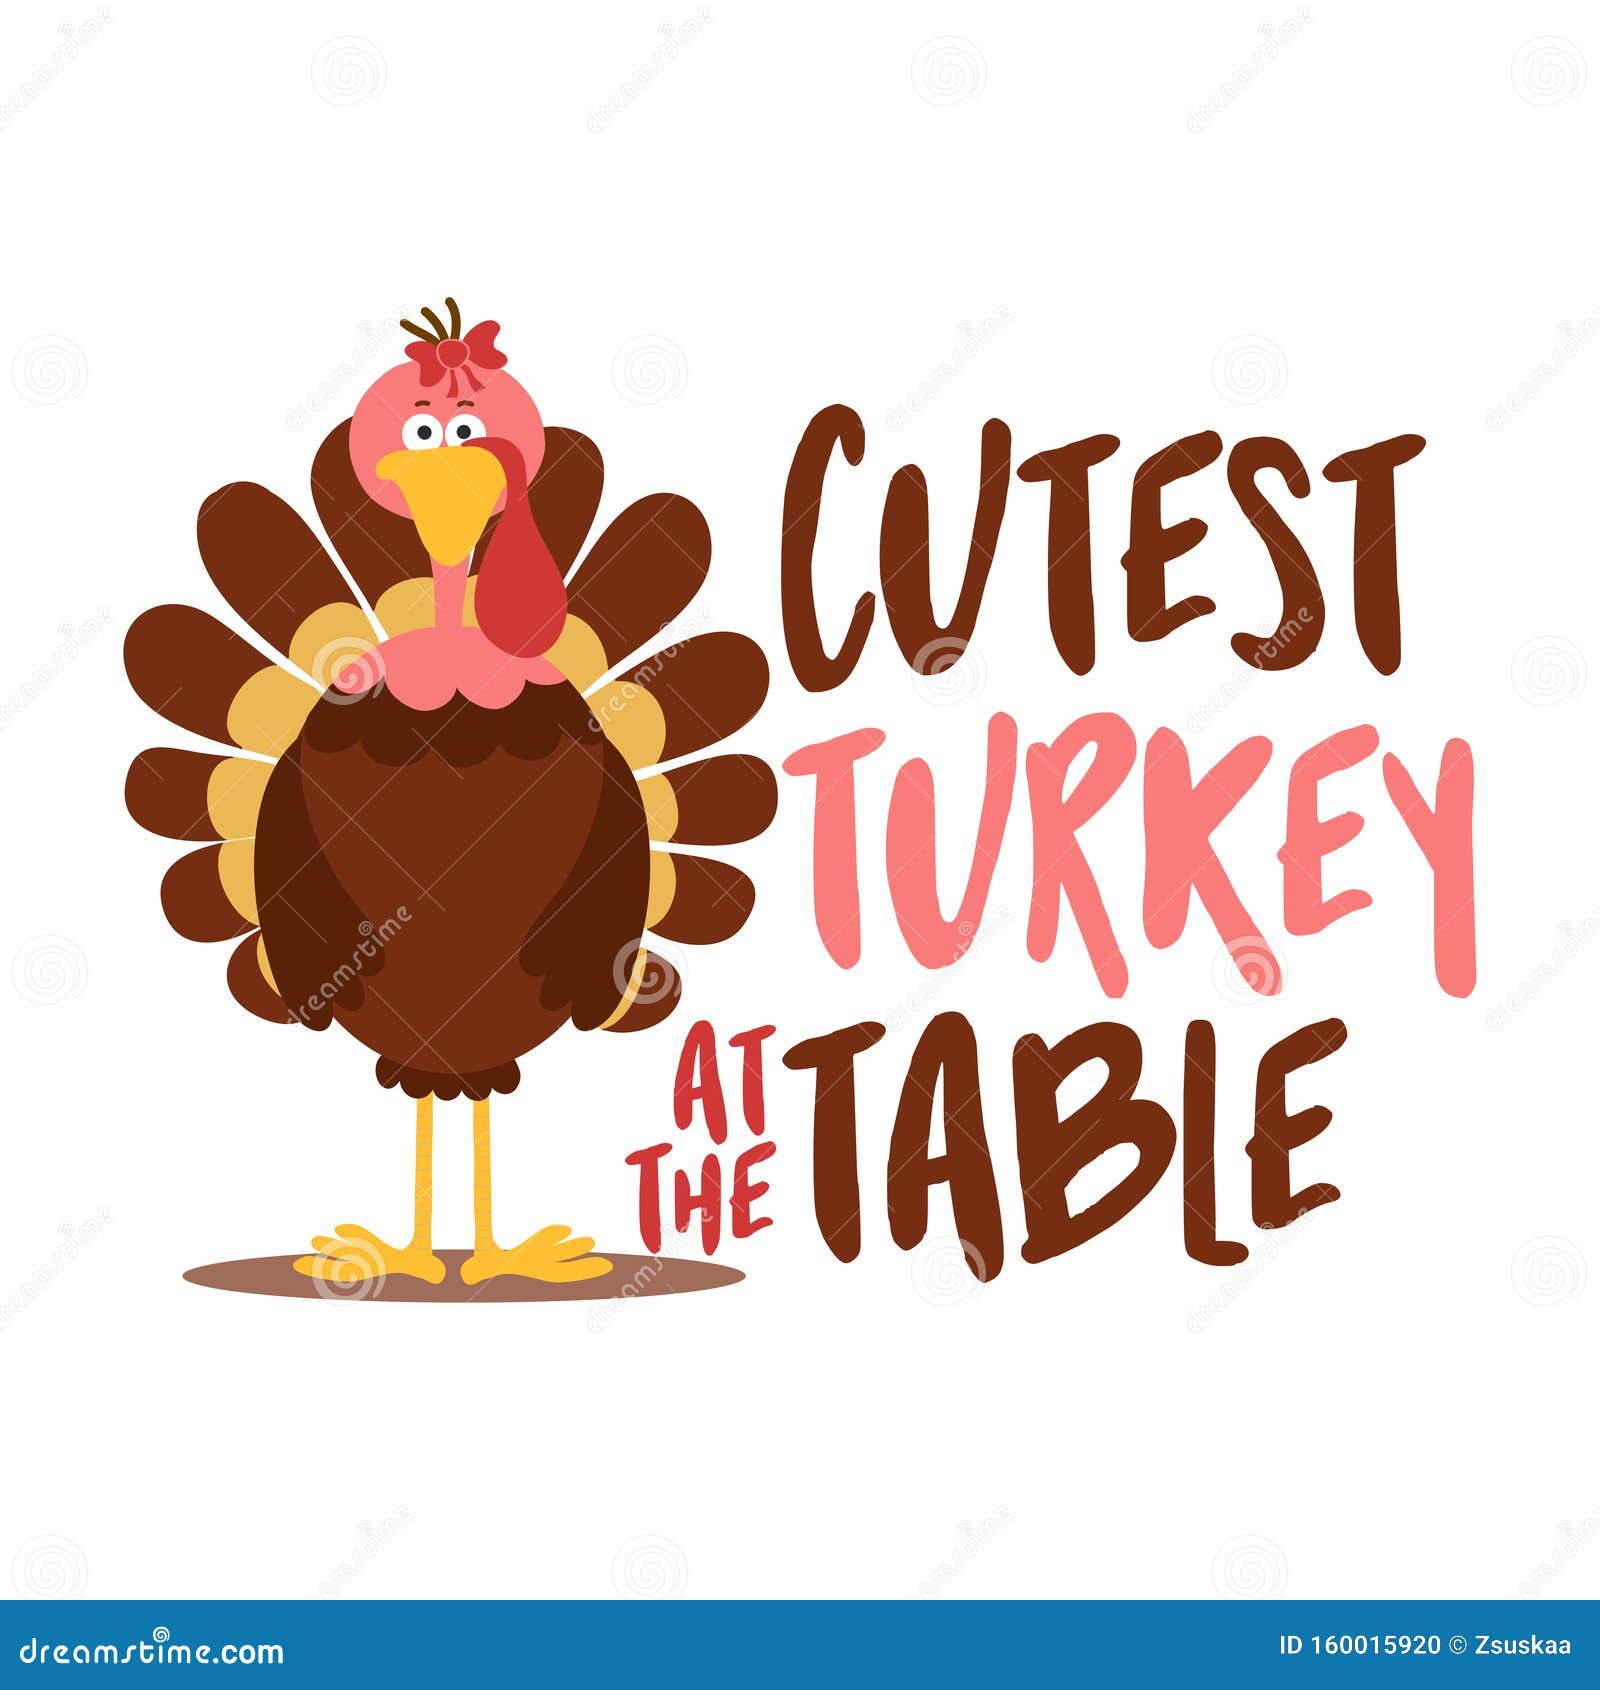 cutest turkey at the table - thanksgiving day calligraphic poster.